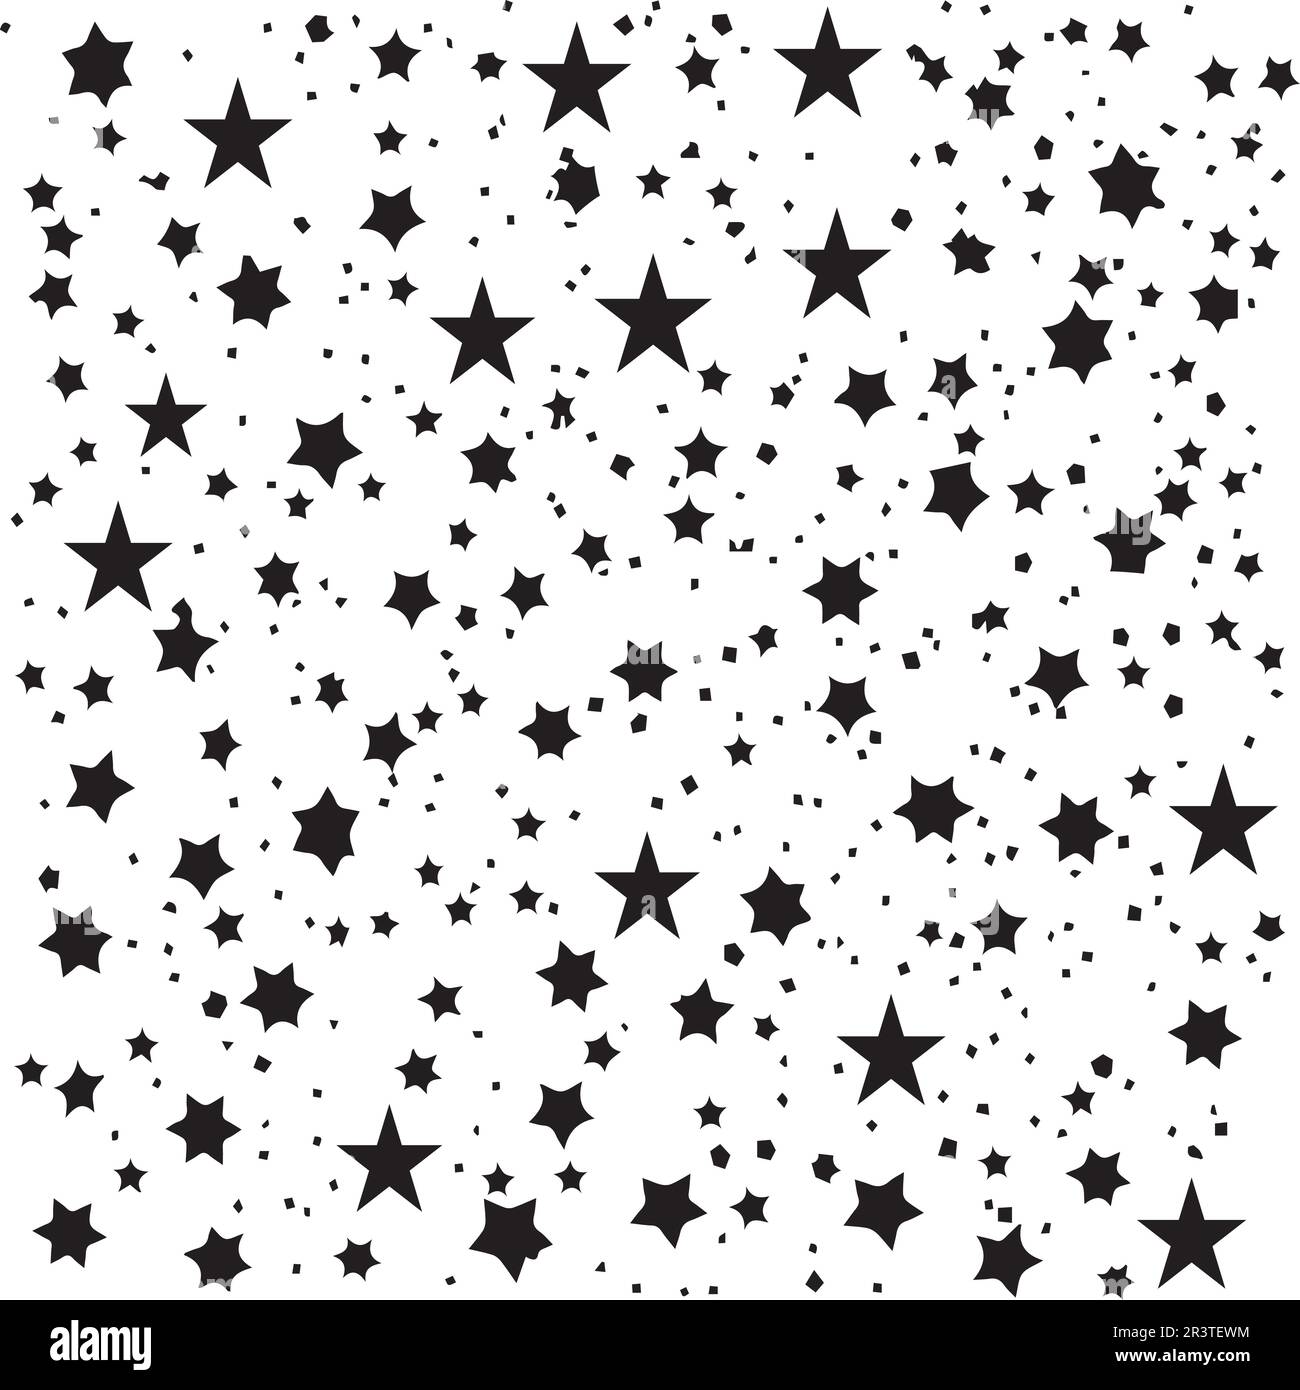 A black star pattern with many small stars vector Stock Vector Image ...